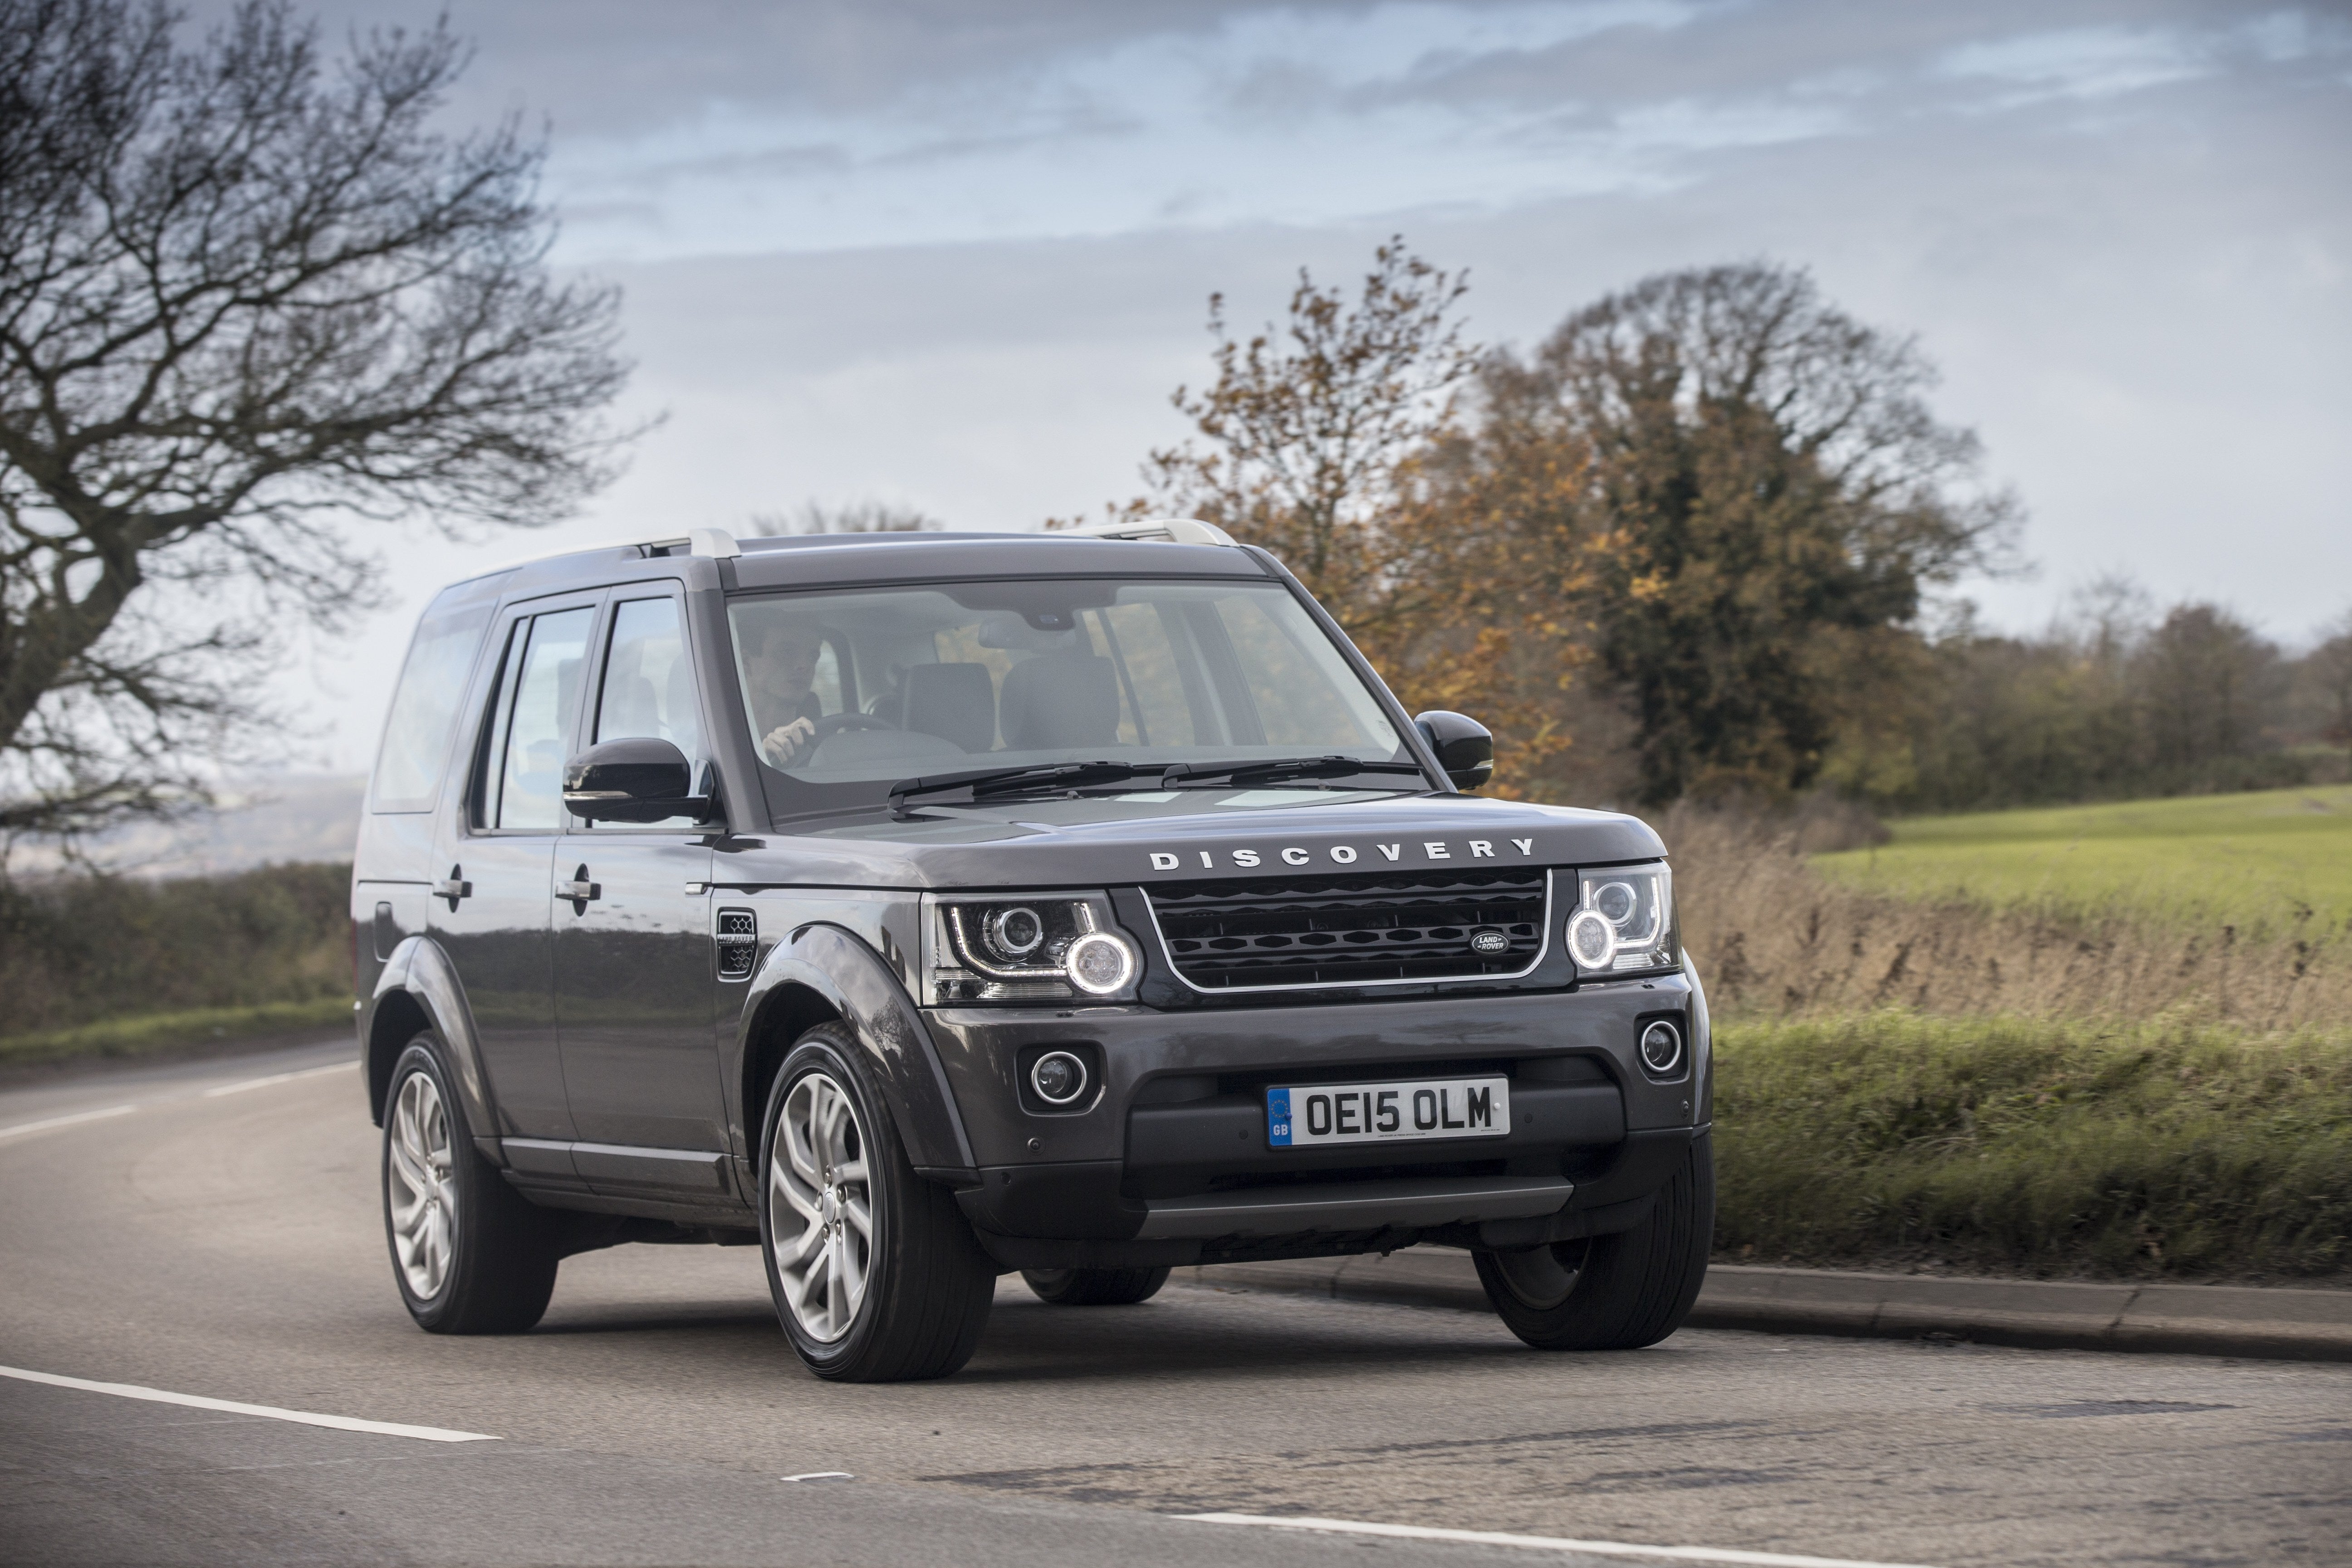 Land Rover Discovery 2009 frontright exterior